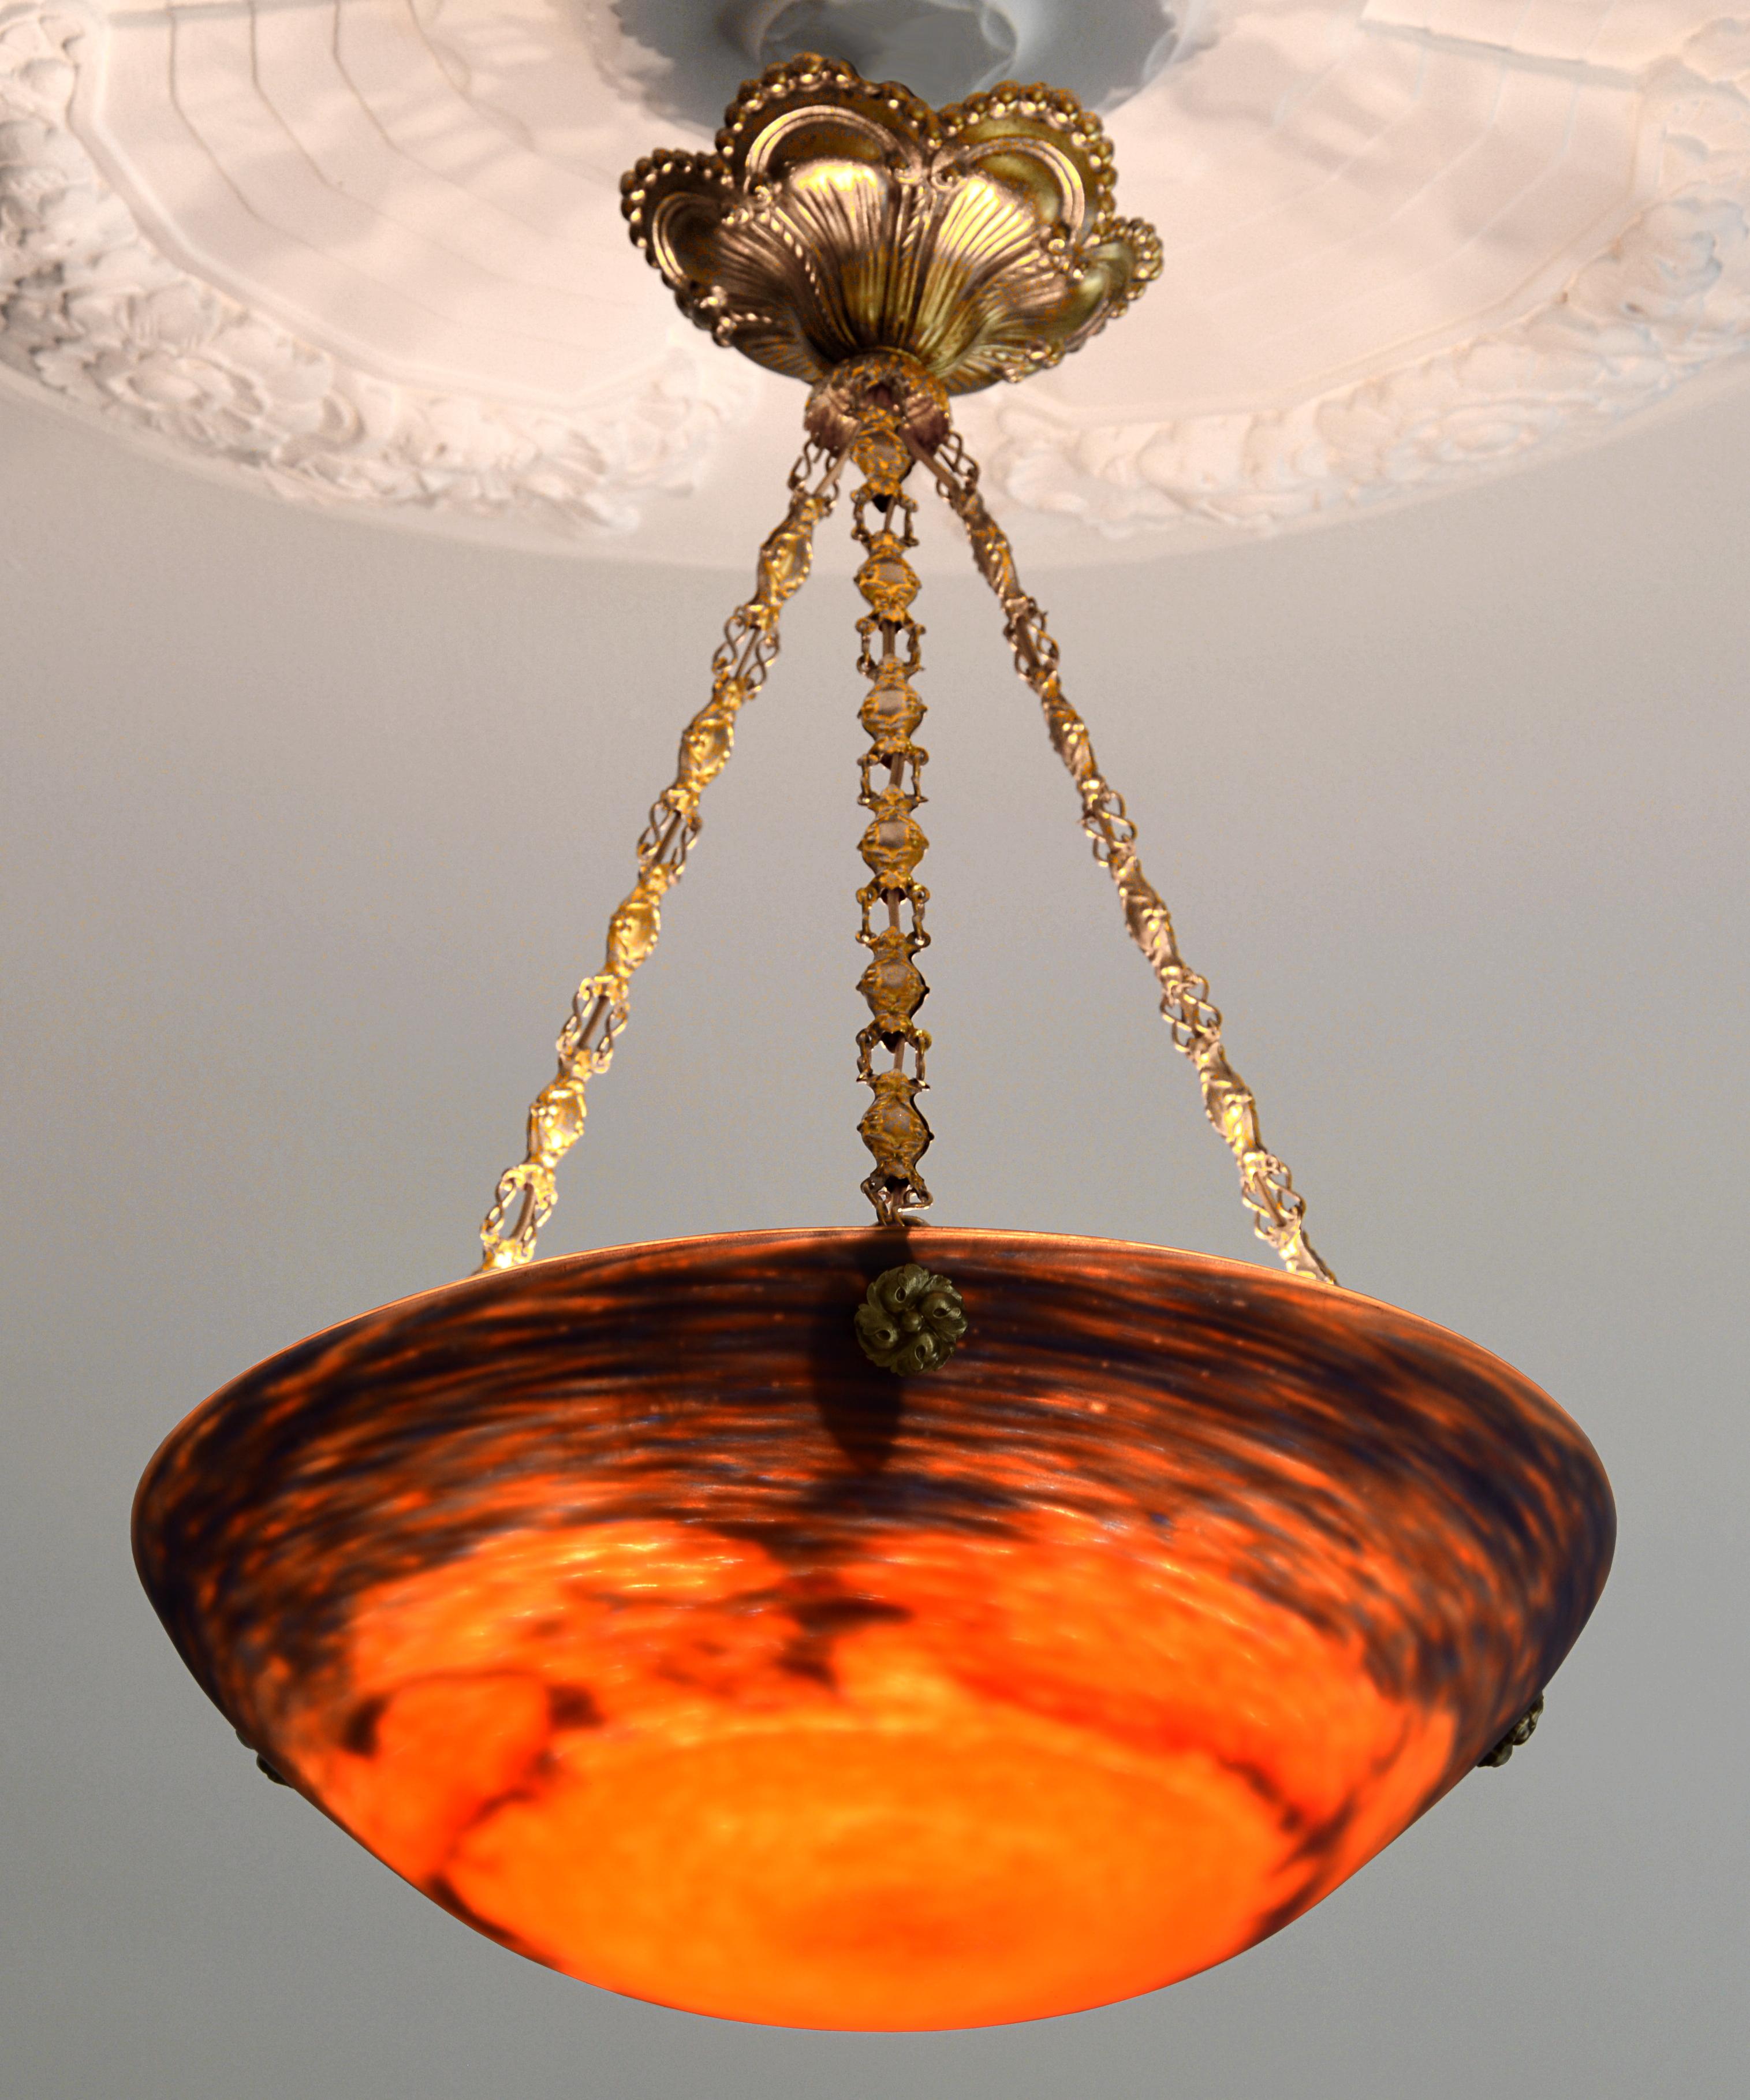 French Art Deco chandelier by Jean Noverdy (Dijon), France, late 1920s. Glass and brass. Mottled blown thick double glass shade. Colors: dark blue, orange and red. Original stamped brass frame. Signed 